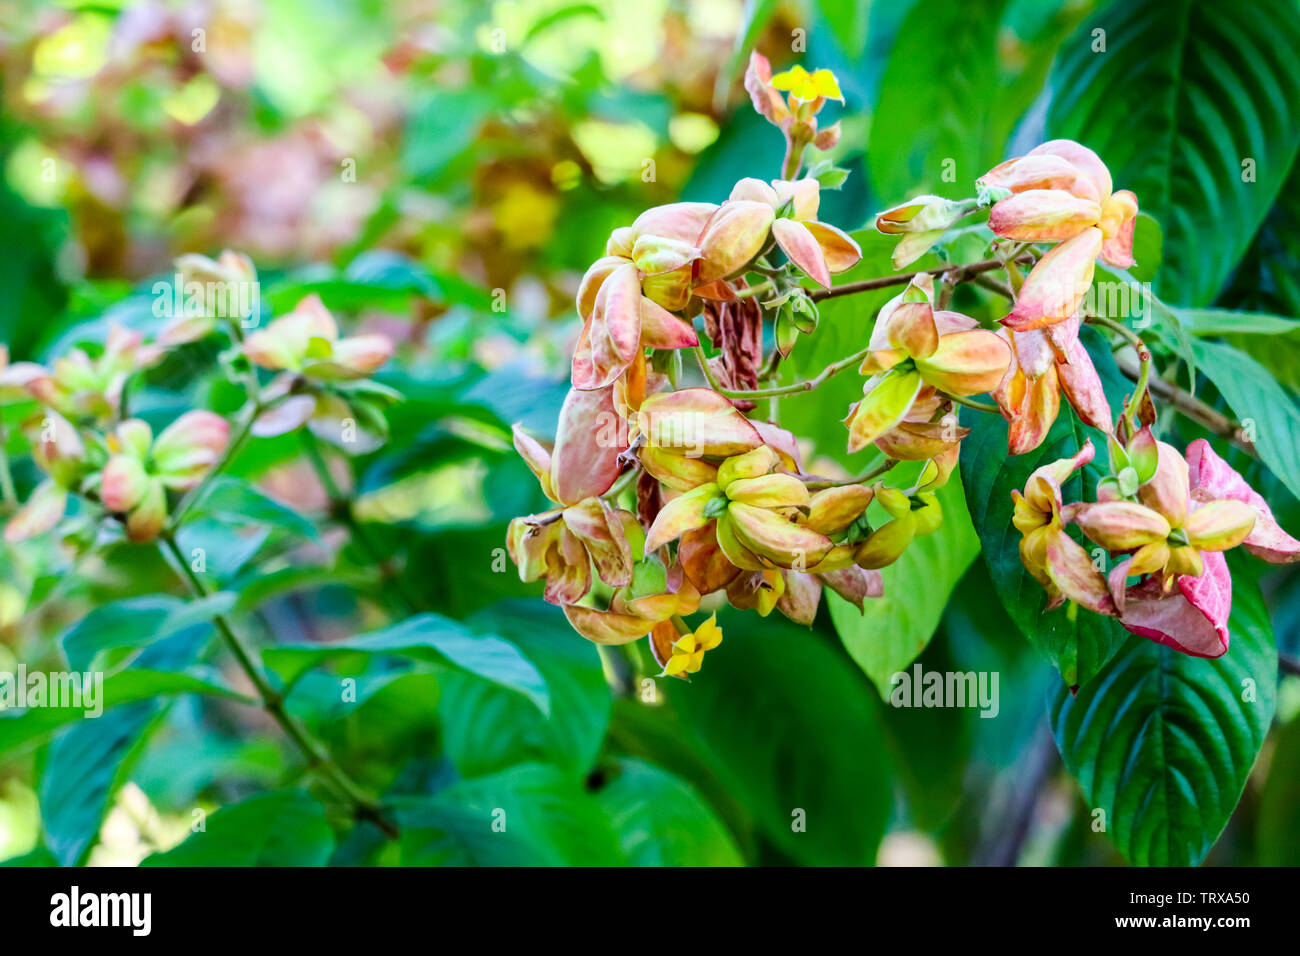 The calyx expanded into five lobe of orange pink yellow and with soft short hairs according to the branches The bottom leaves, flower petals Stock Photo